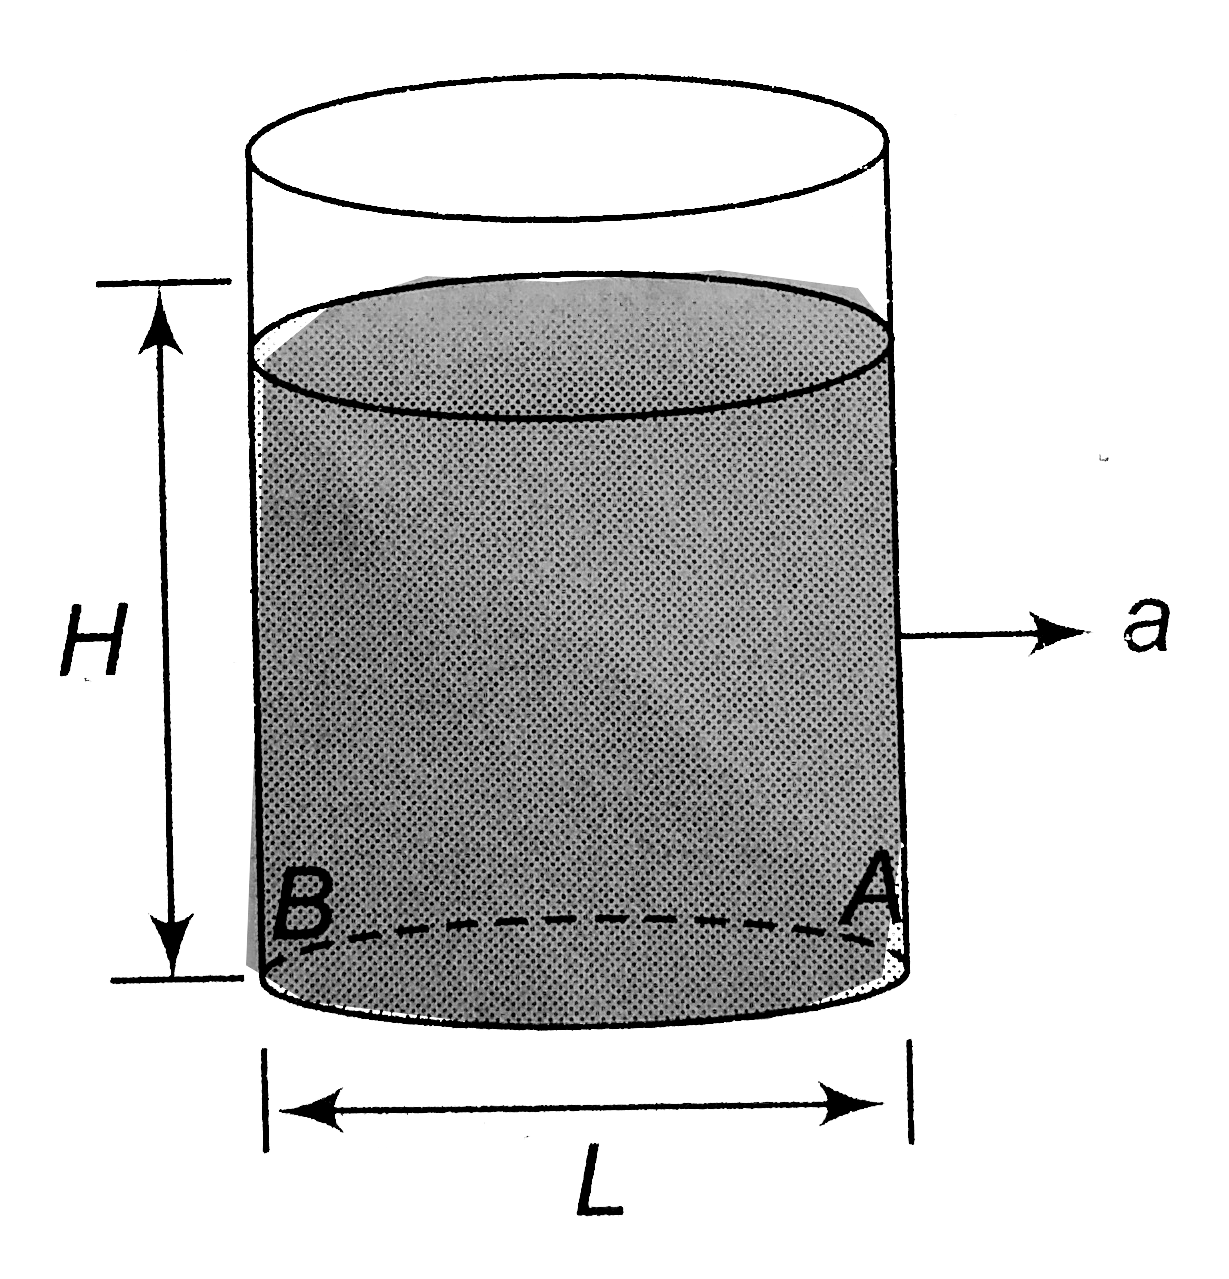 A tank with base area L^2 is filled with a liquid to height H. The tank is acceleration horizontally with acceleration a as shown in figure. If a small hole  is made at the point A. then it is observed that the liquid does not come out of the tank. The magnitude of acceleration should be